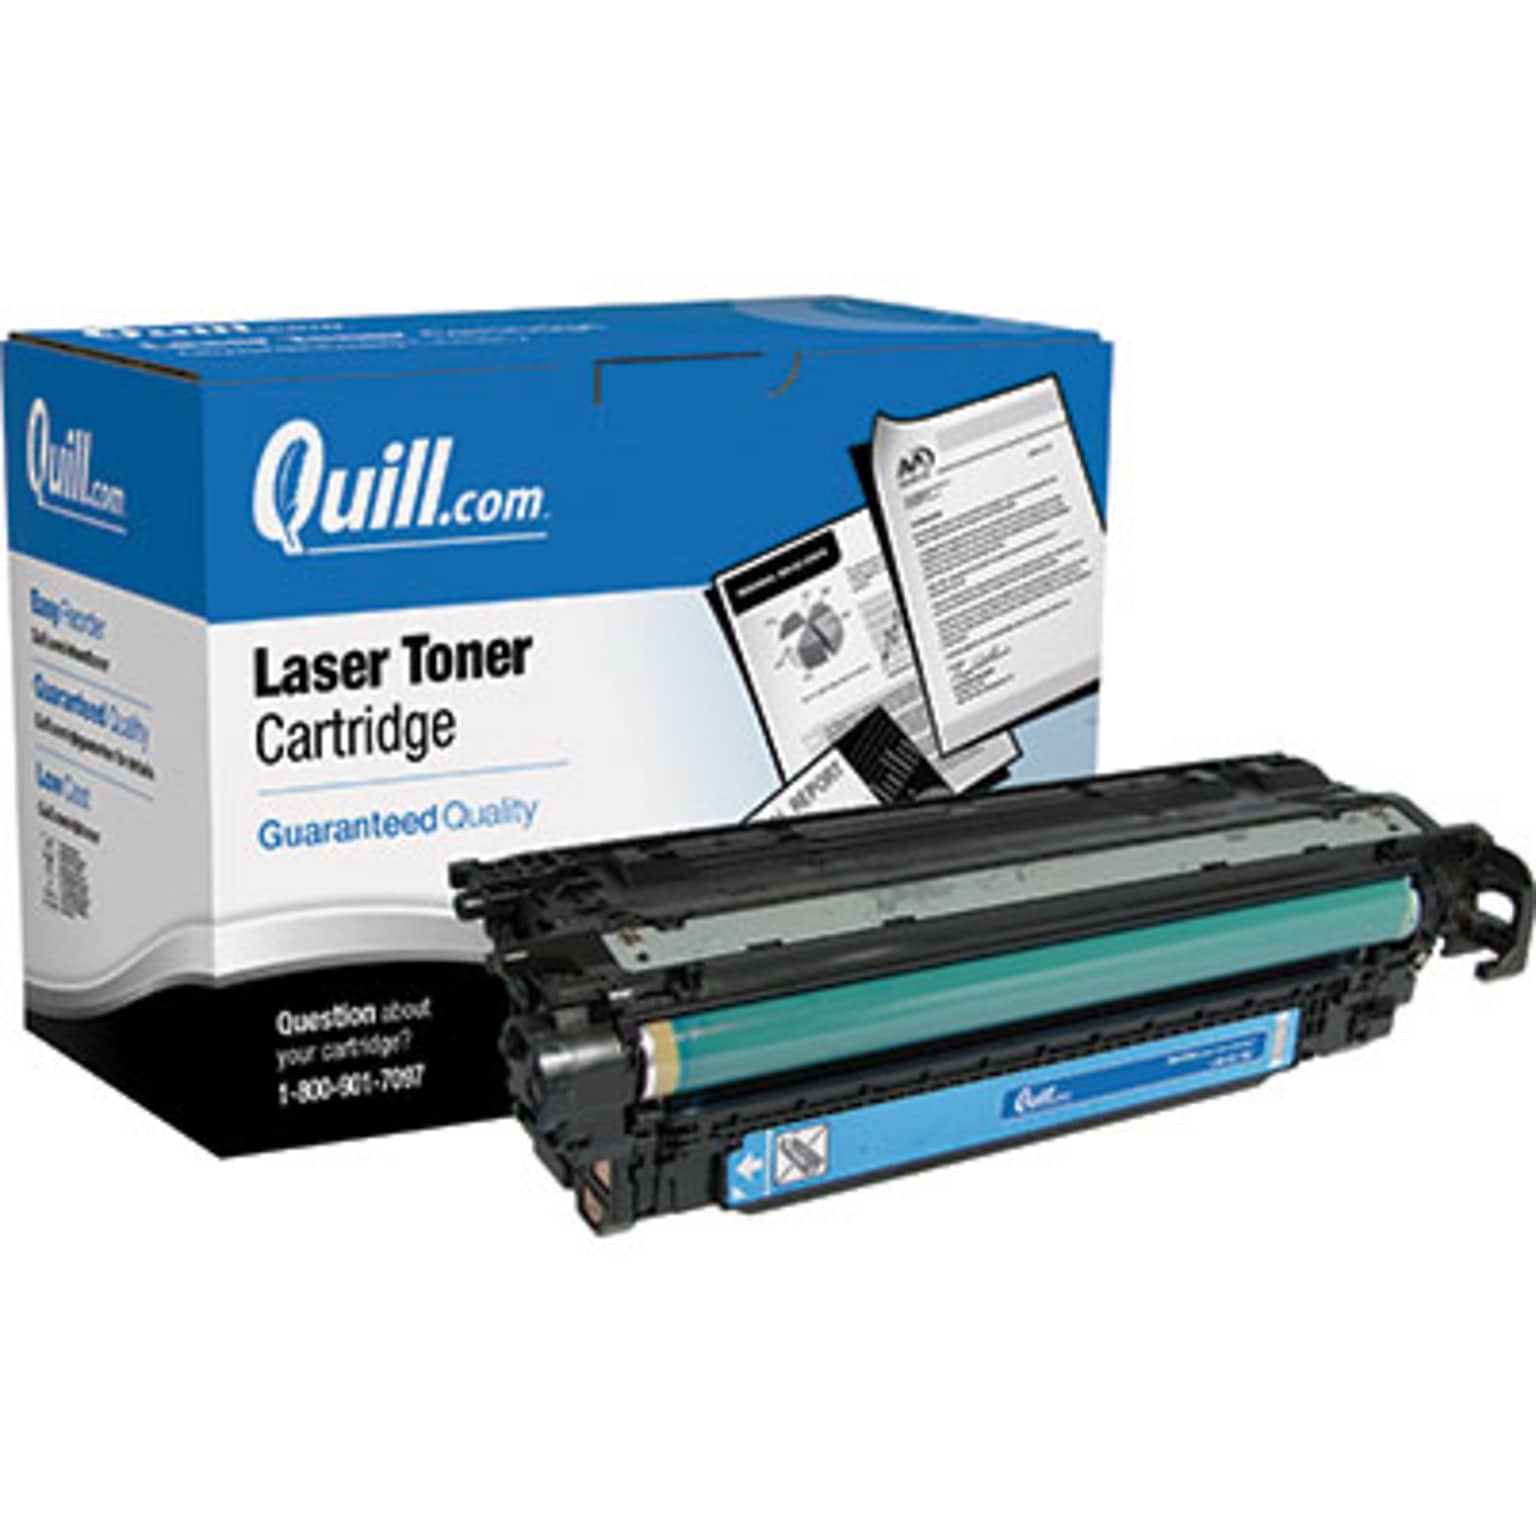 Quill Brand® Remanufactured Cyan Standard Yield Toner Cartridge Replacement for HP 504A (CE251A) (Lifetime Warranty)